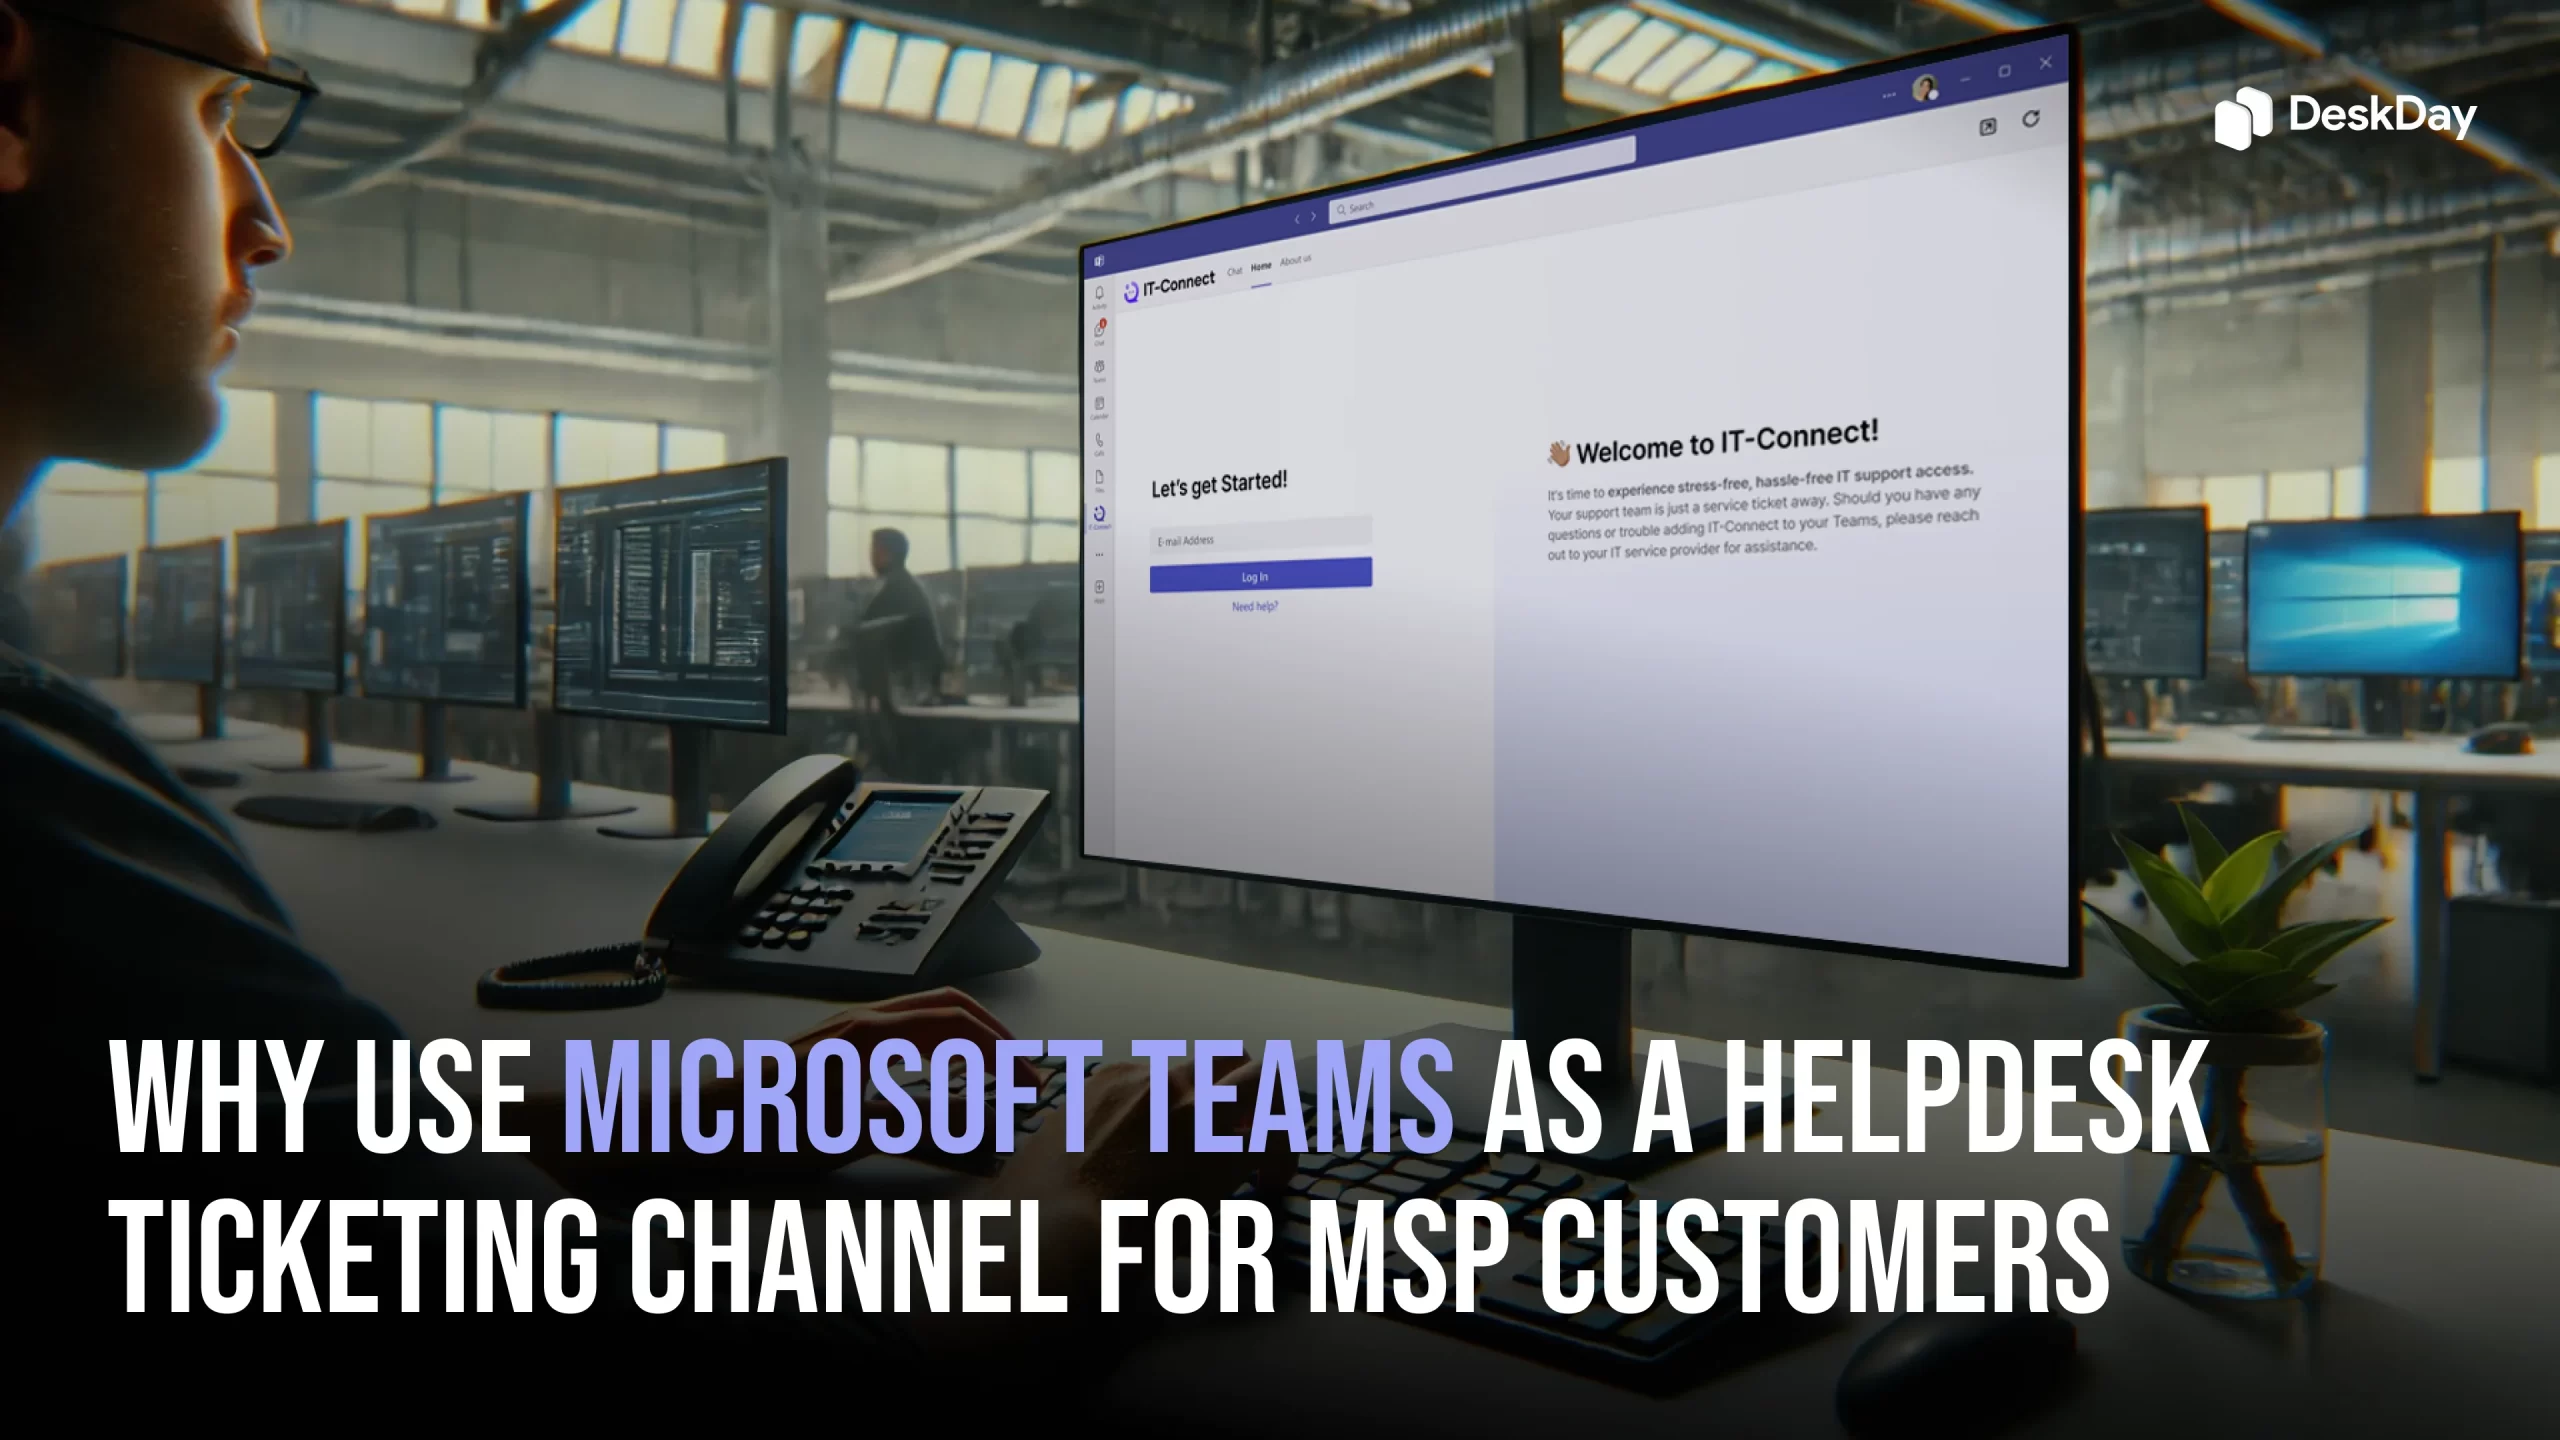 Why use Microsoft Teams as a helpdesk ticketing channel for MSP customers